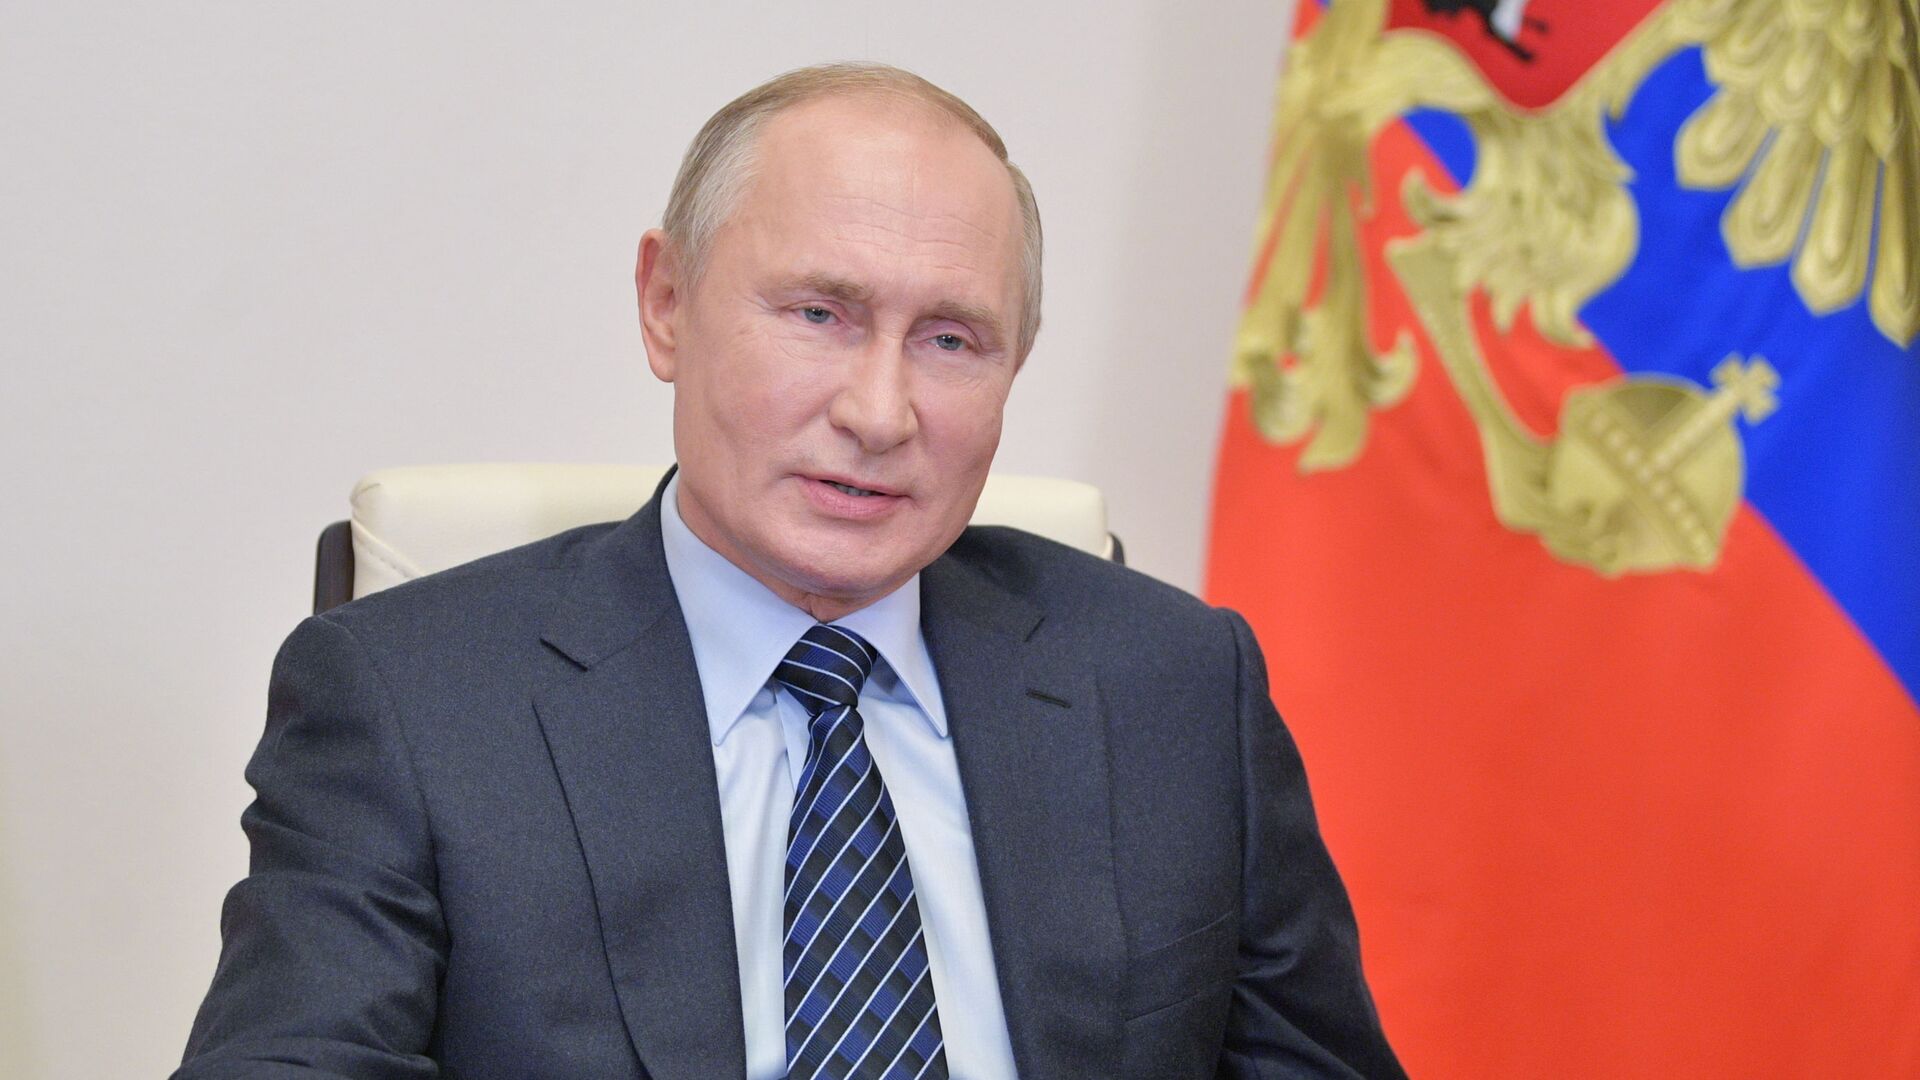 Russia's President Vladimir Putin addresses members of the Russian Union of Industrialists and Entrepreneurs (RSPP) via a video conference call at the Novo-Ogaryovo state residence outside Moscow, Russia October 21, 2020 - Sputnik India, 1920, 19.05.2023